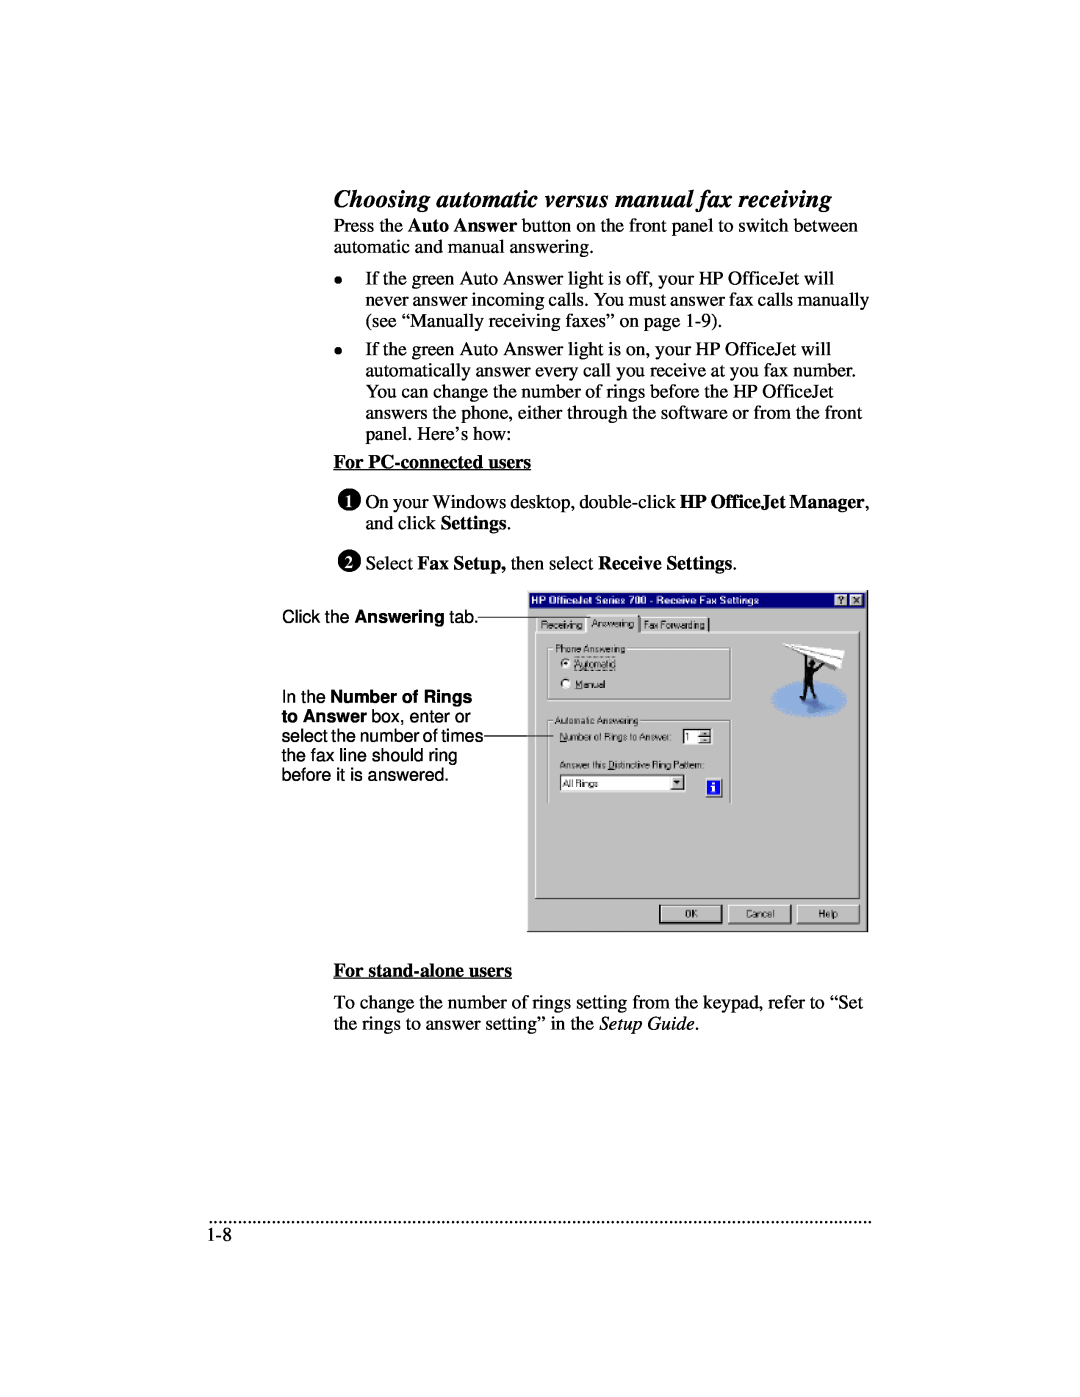 HP 700 Choosing automatic versus manual fax receiving, For PC-connected users, For stand-alone users 